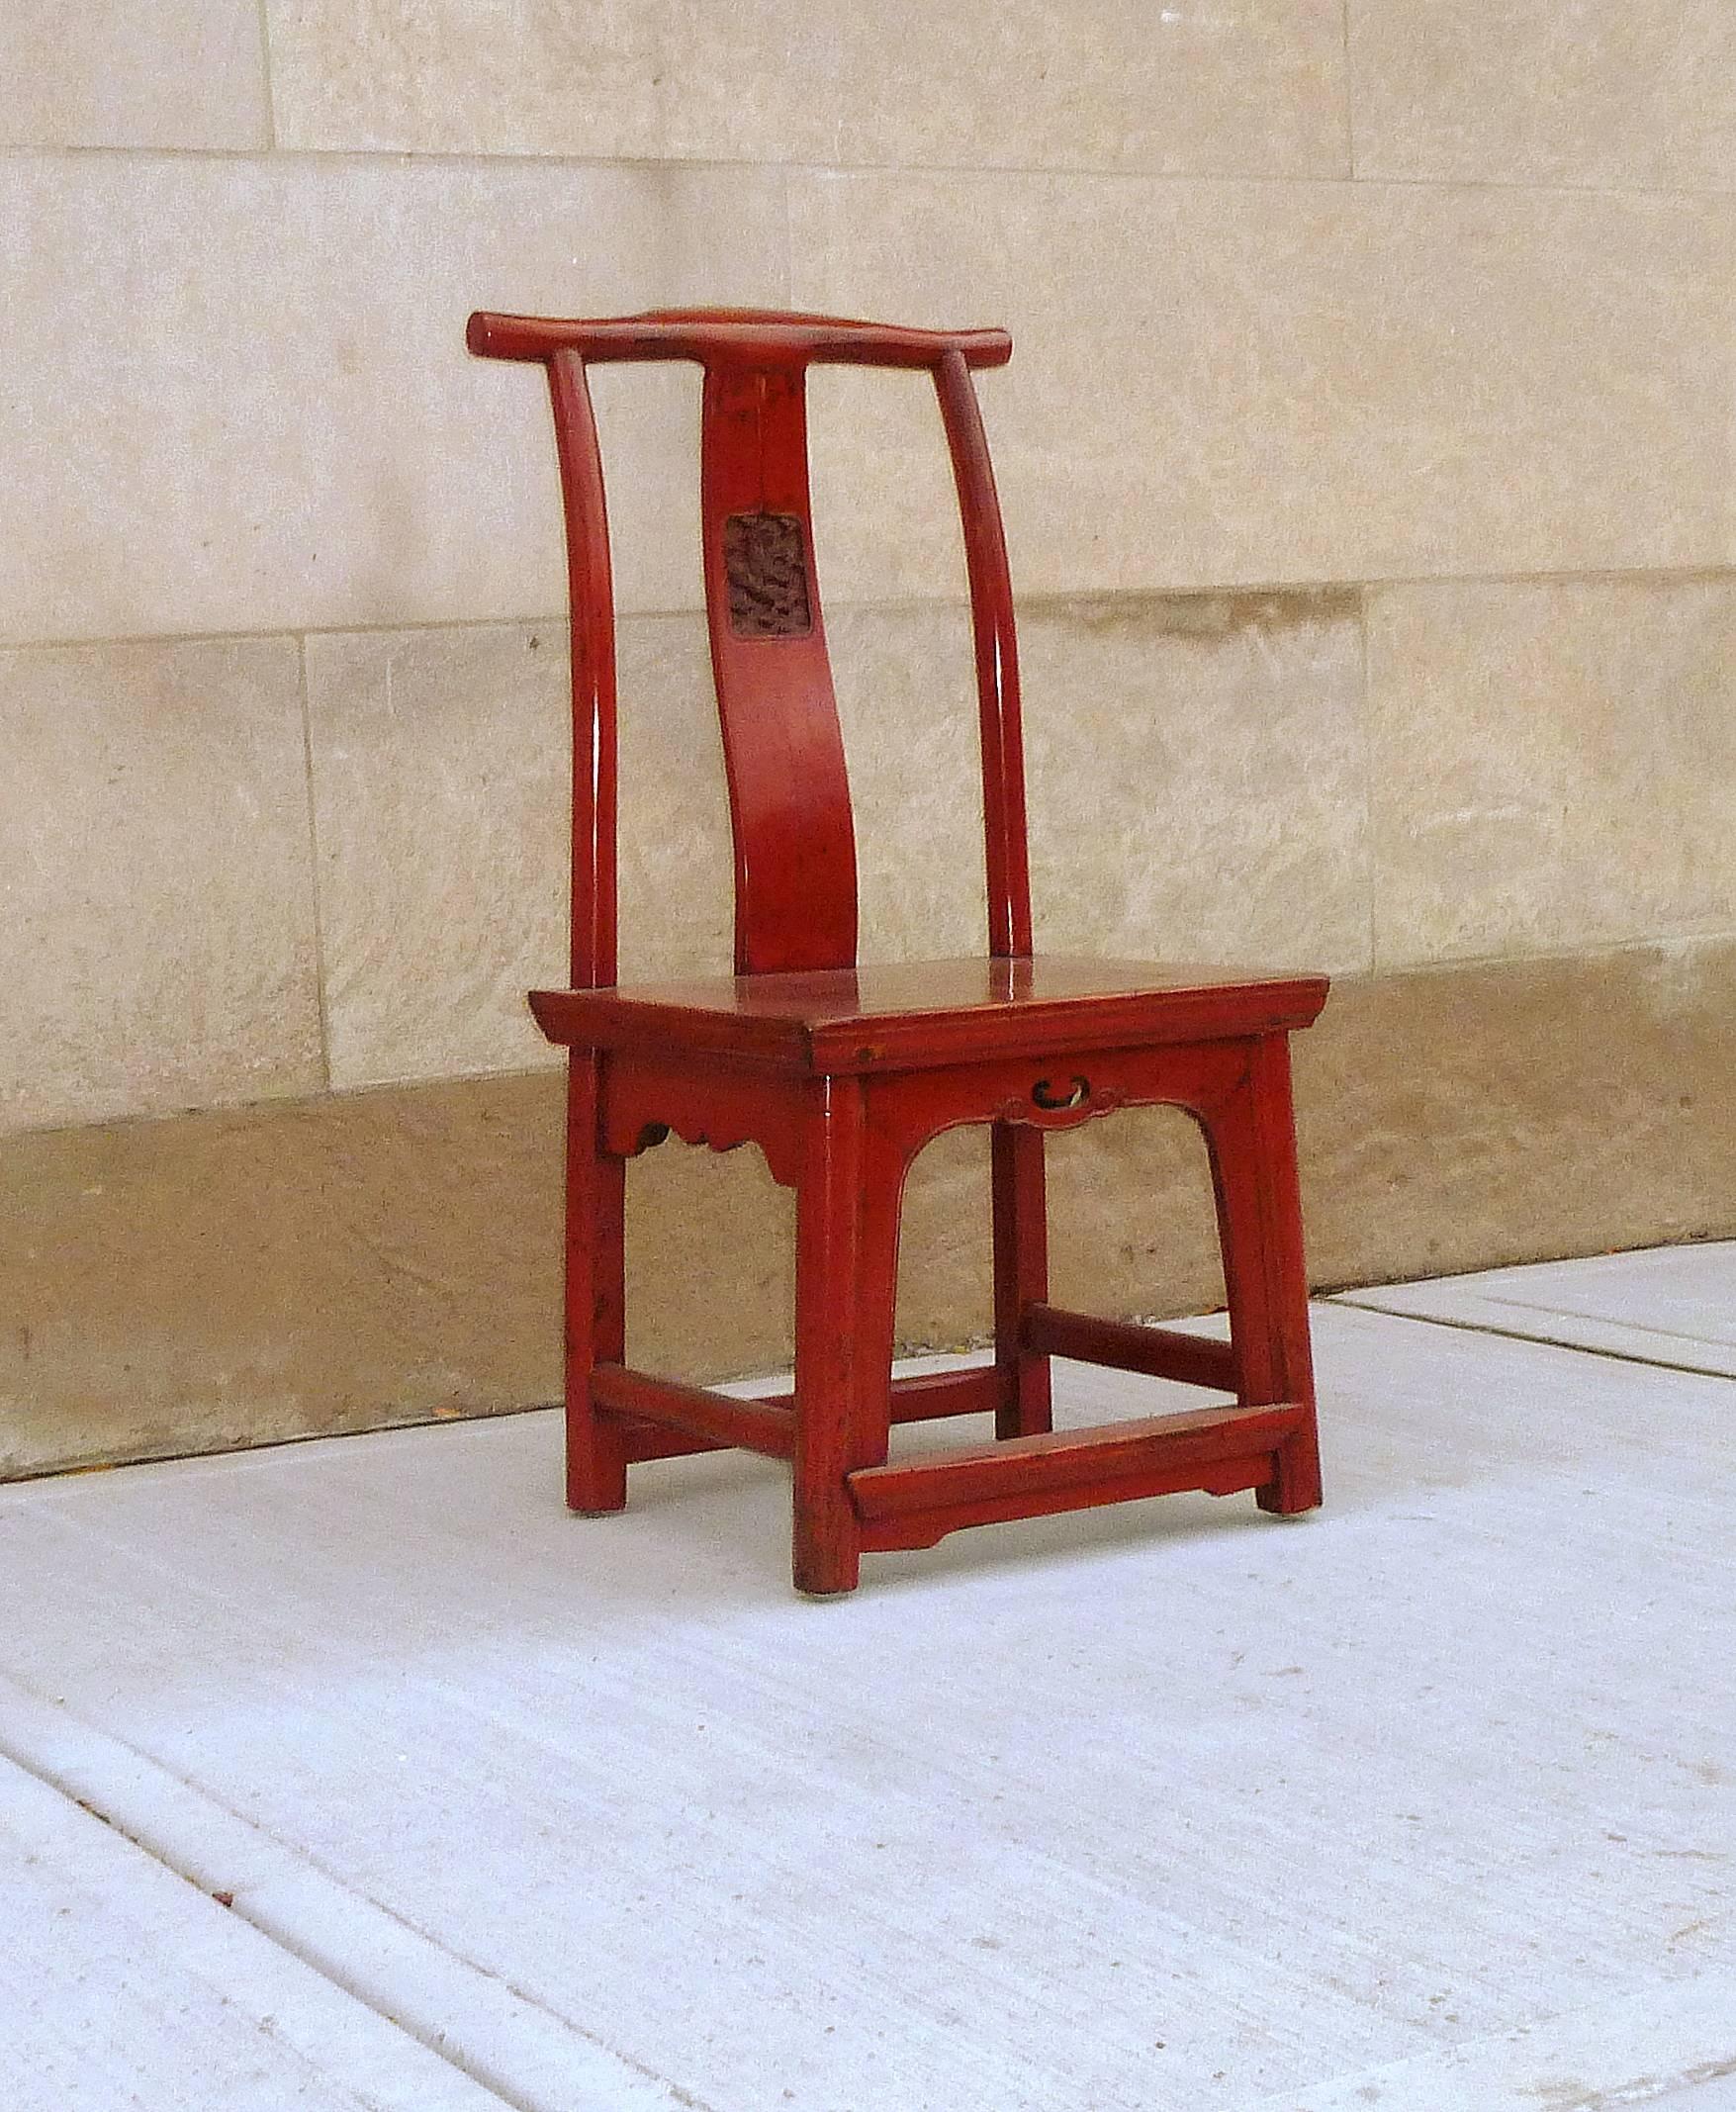 Late 19th Century Red Lacquer Child's Chair